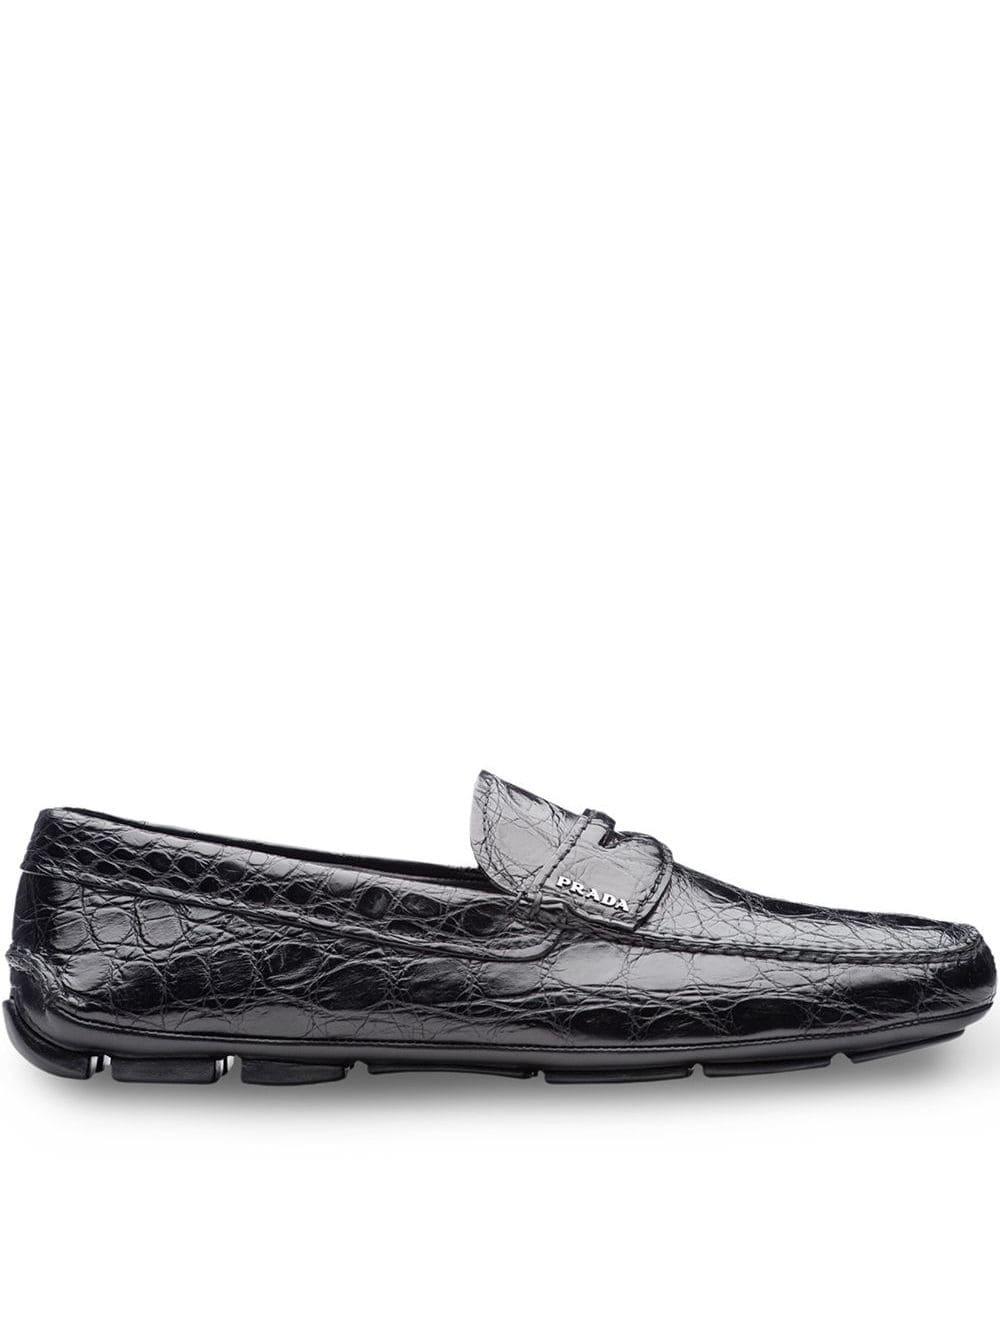 Prada Crocodile Leather Driving Shoes in Black for Men - Lyst